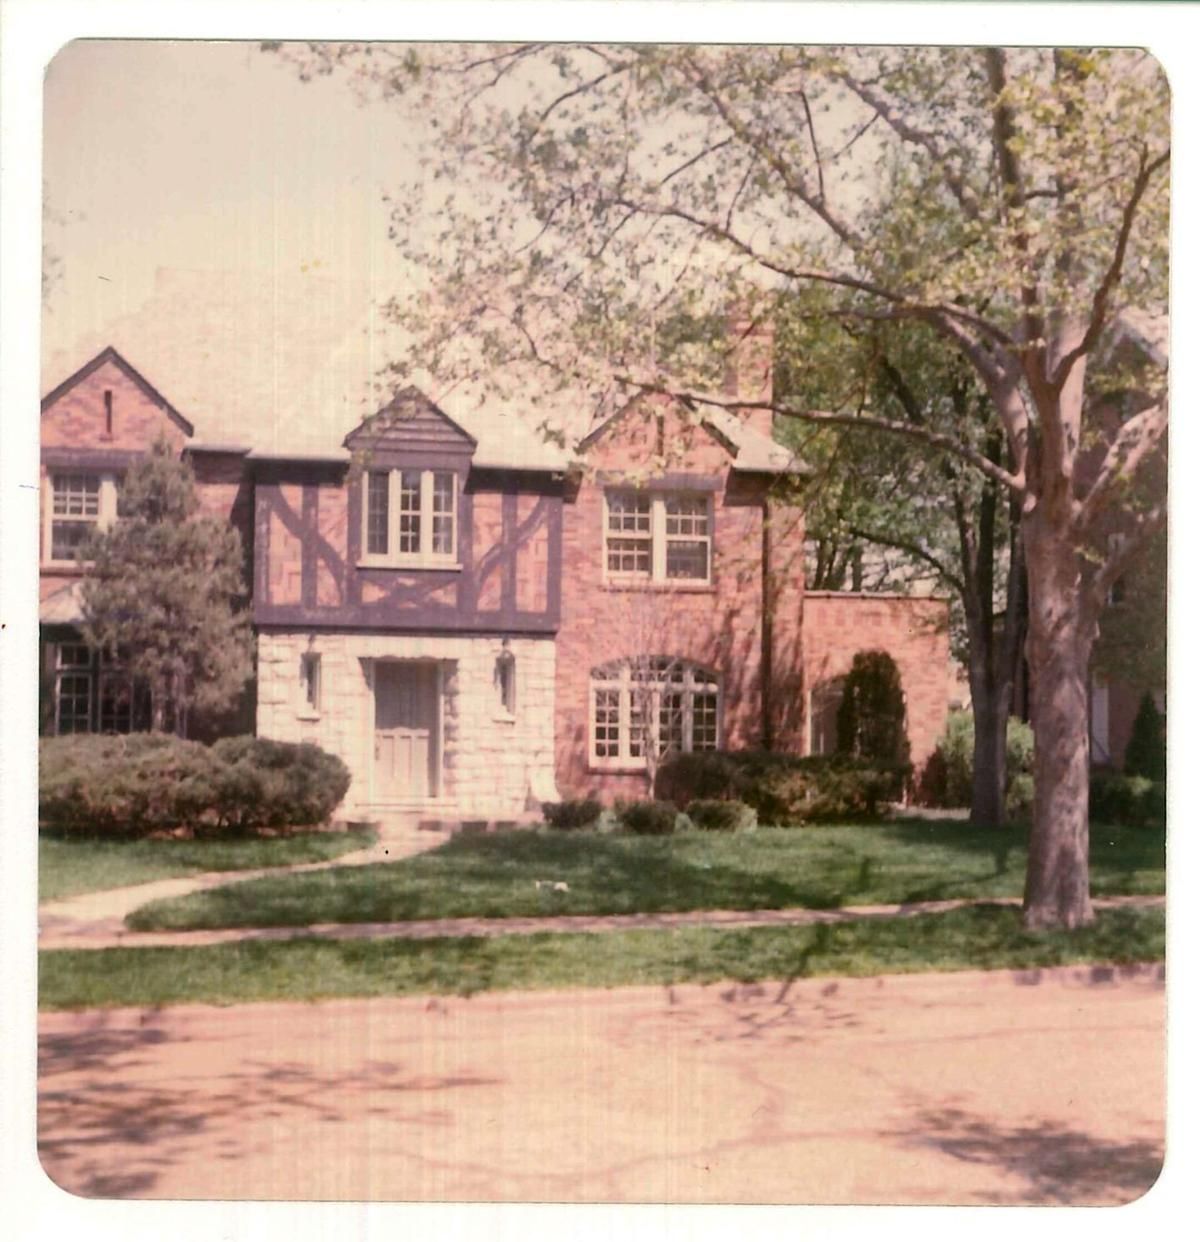 Judy Gladney's former home on Teasdale Avenue in the University Hills subdivision of University City. Gladney, now 67, moved there as a teenager with her family in 1965. Image courtesy of Judy Gladney. United States, undated.